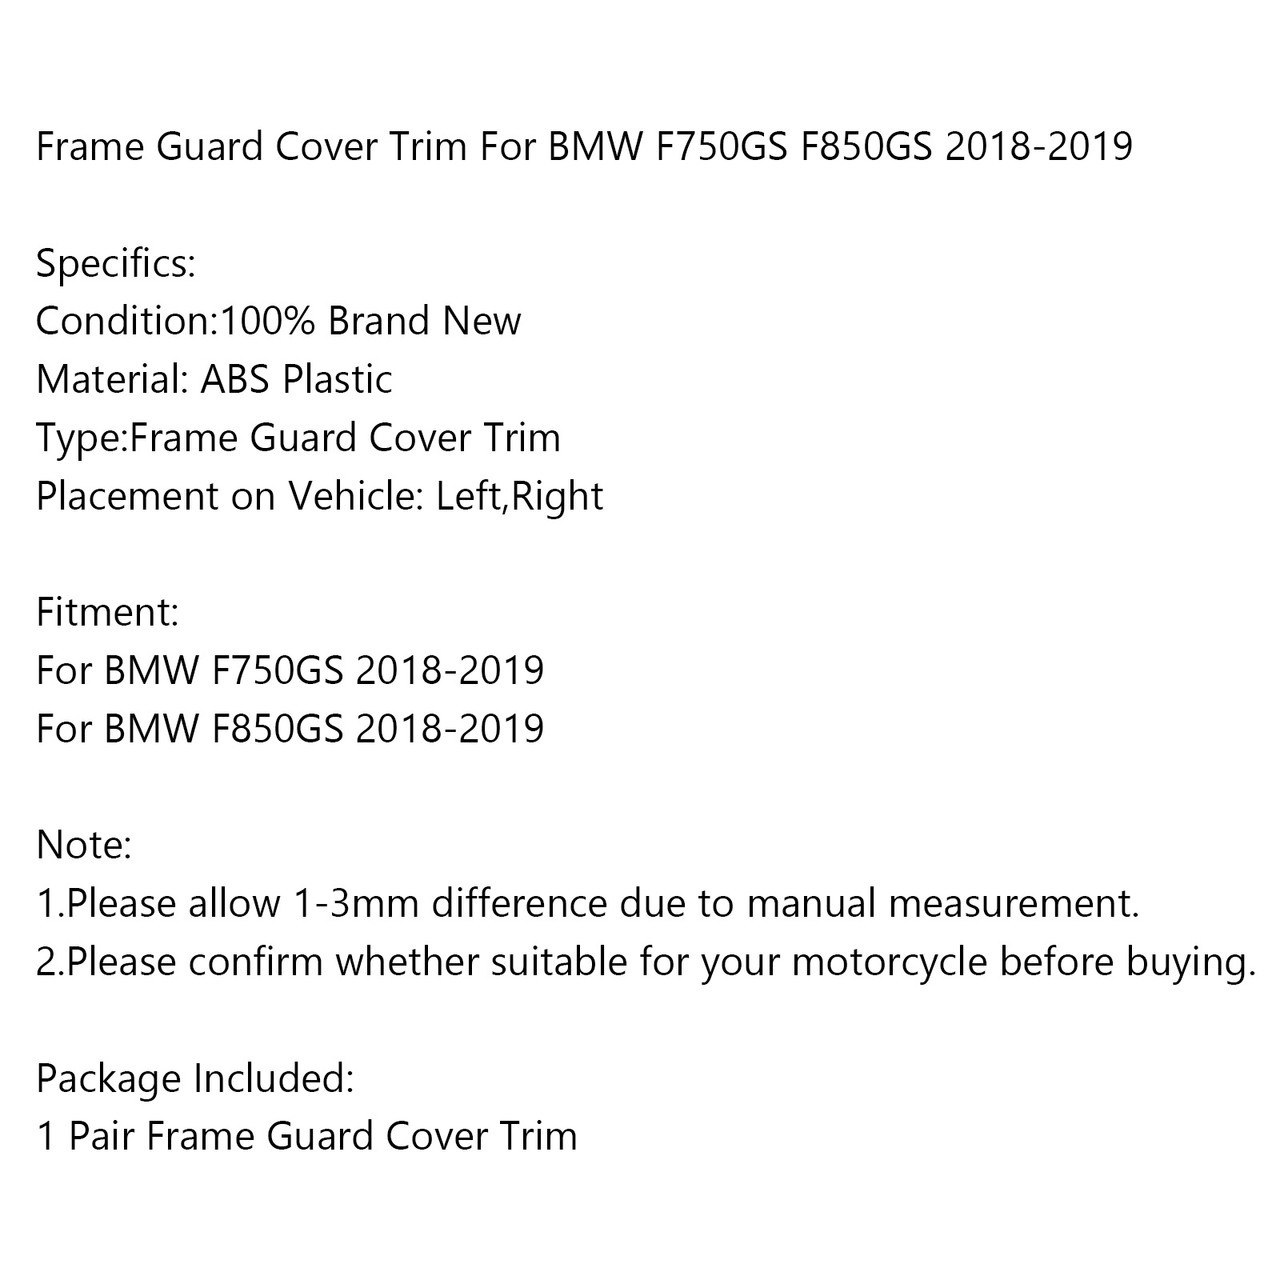 Frame Guard Cover Trim Fit For BMW F750GS F850GS 18-19 Black